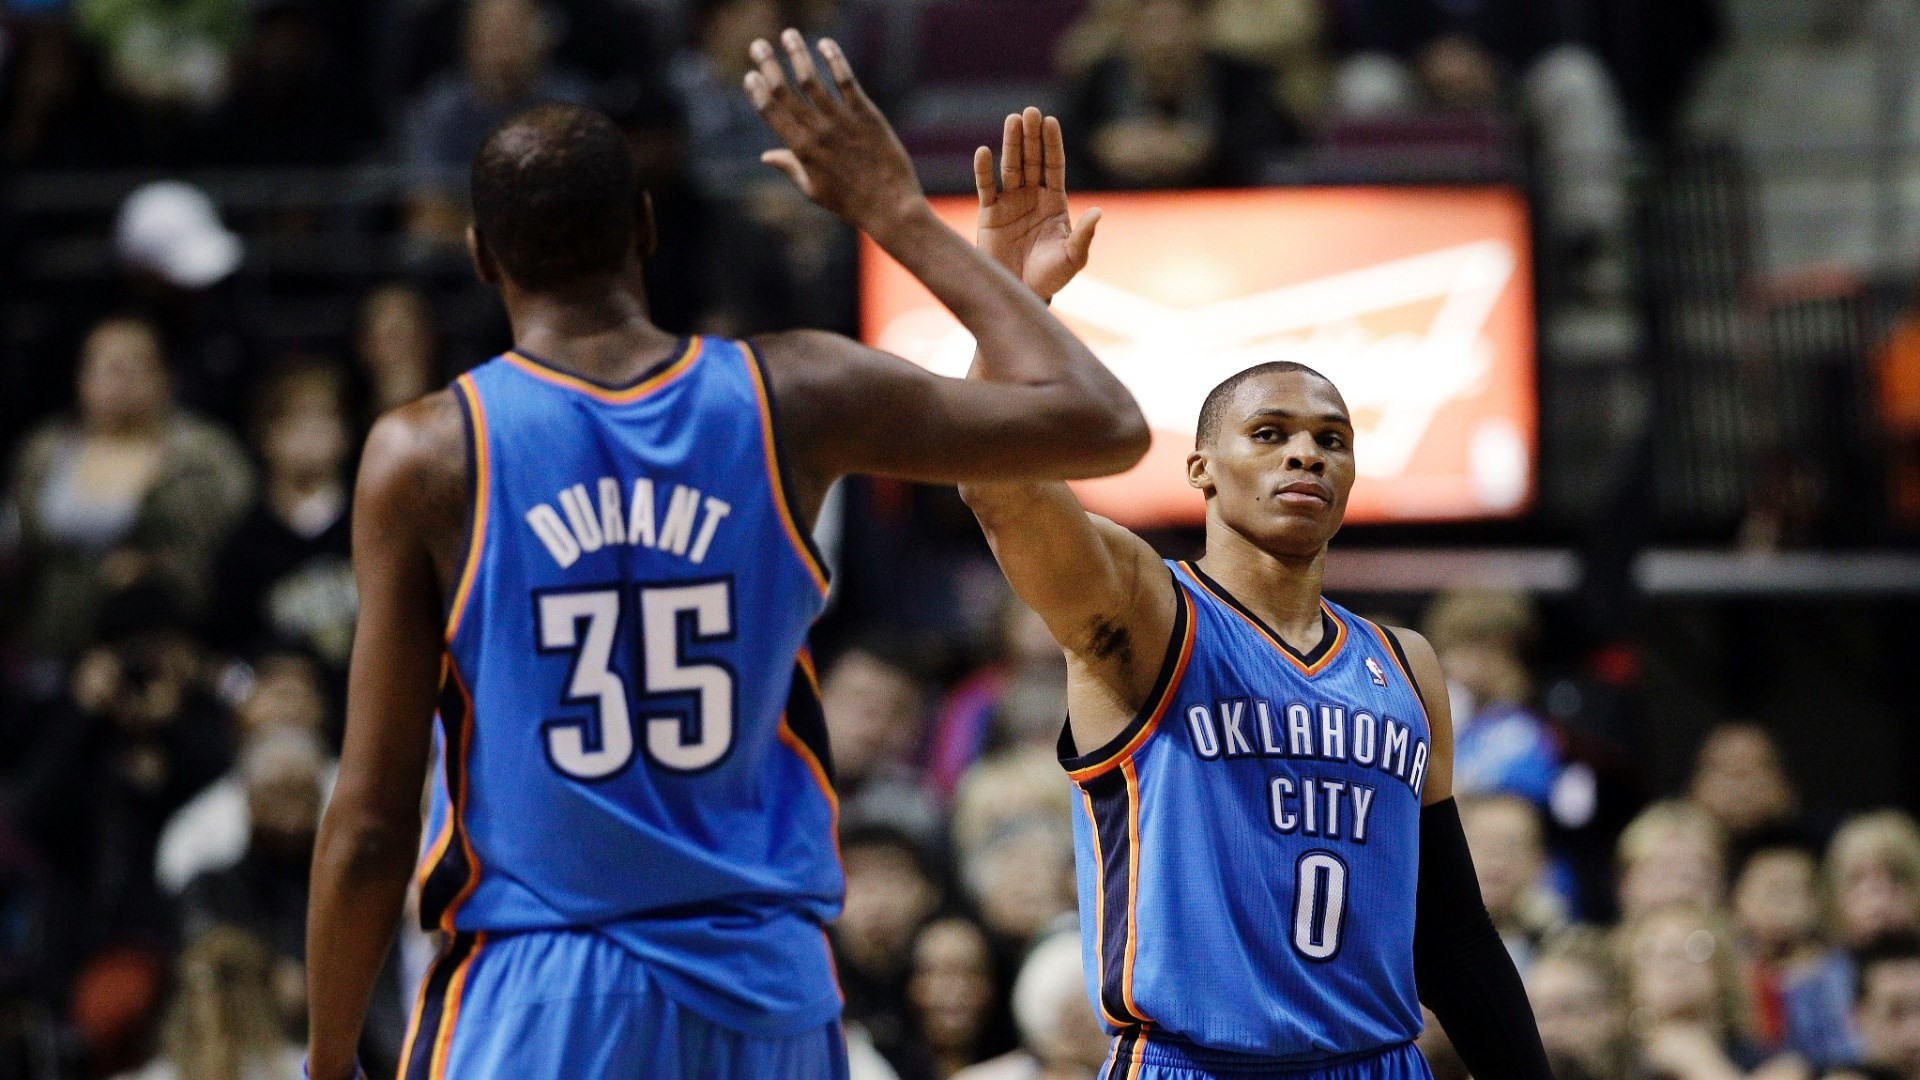 Arran Gordon – Pretty russell westbrook picture – 1920 x 1080 px